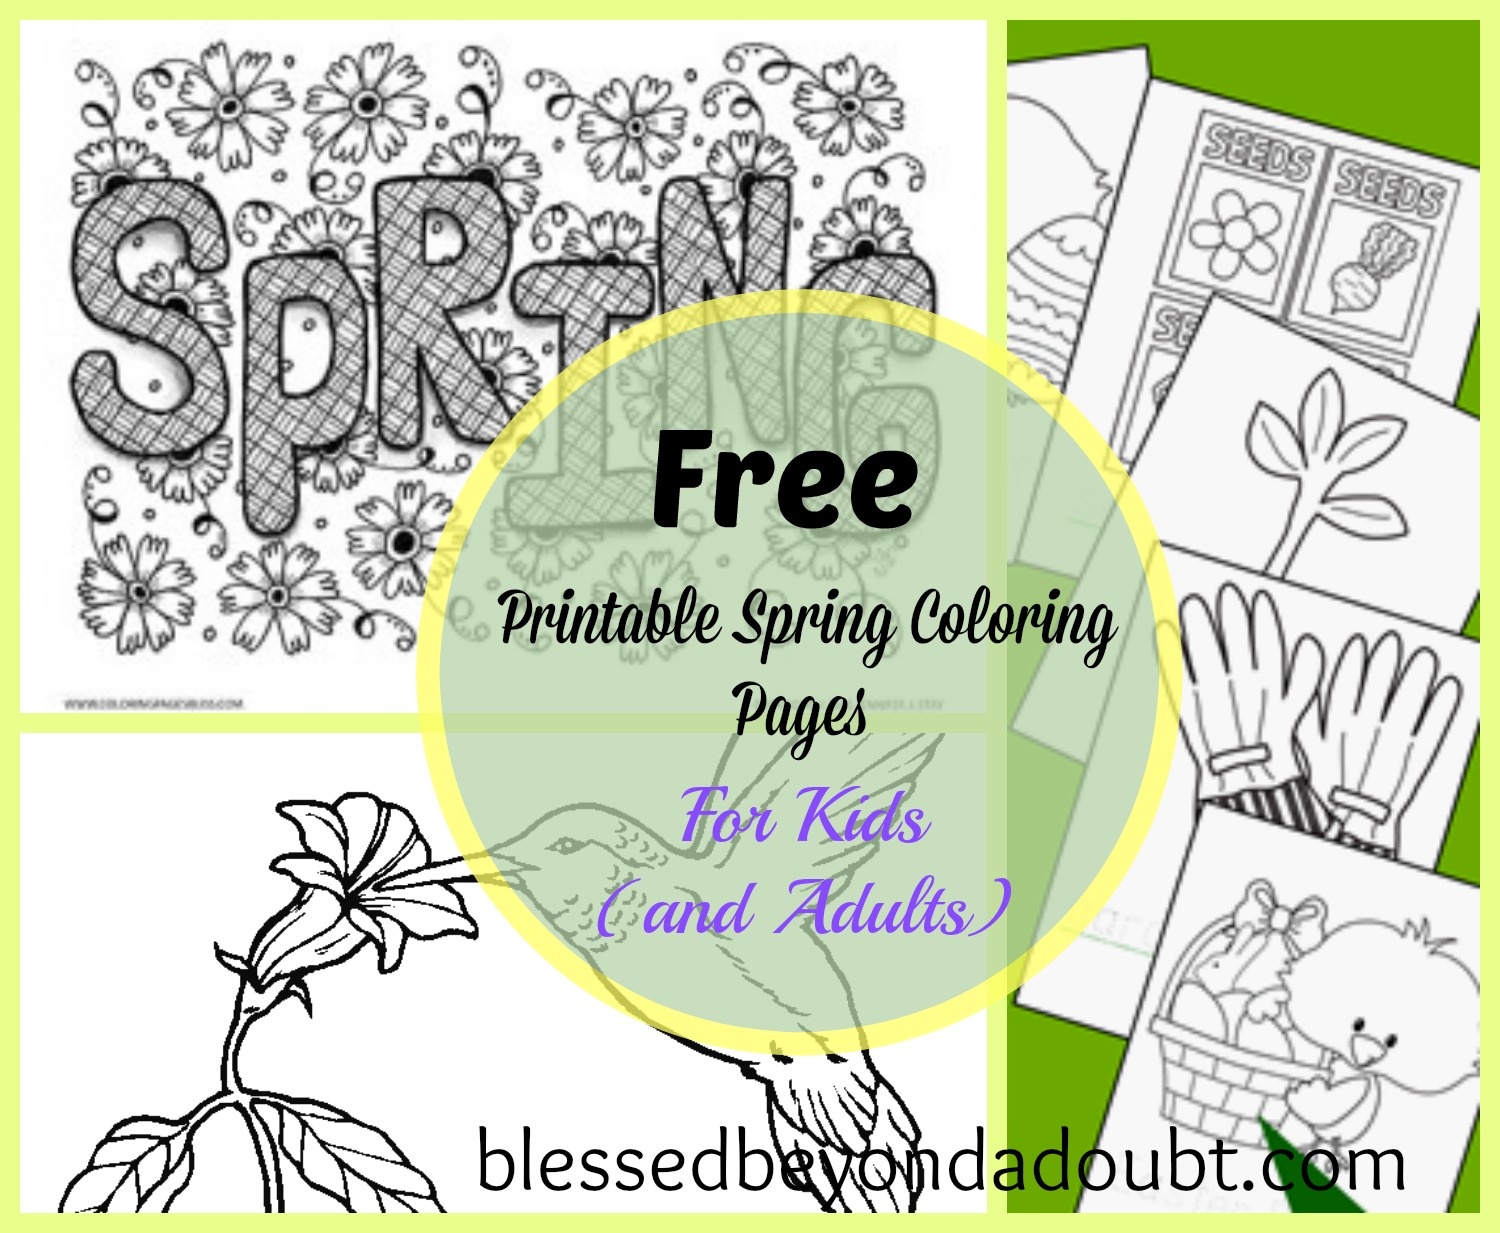 20 + Free Printable Spring Coloring Sheets For Kids (And Adults - Spring Coloring Sheets Free Printable